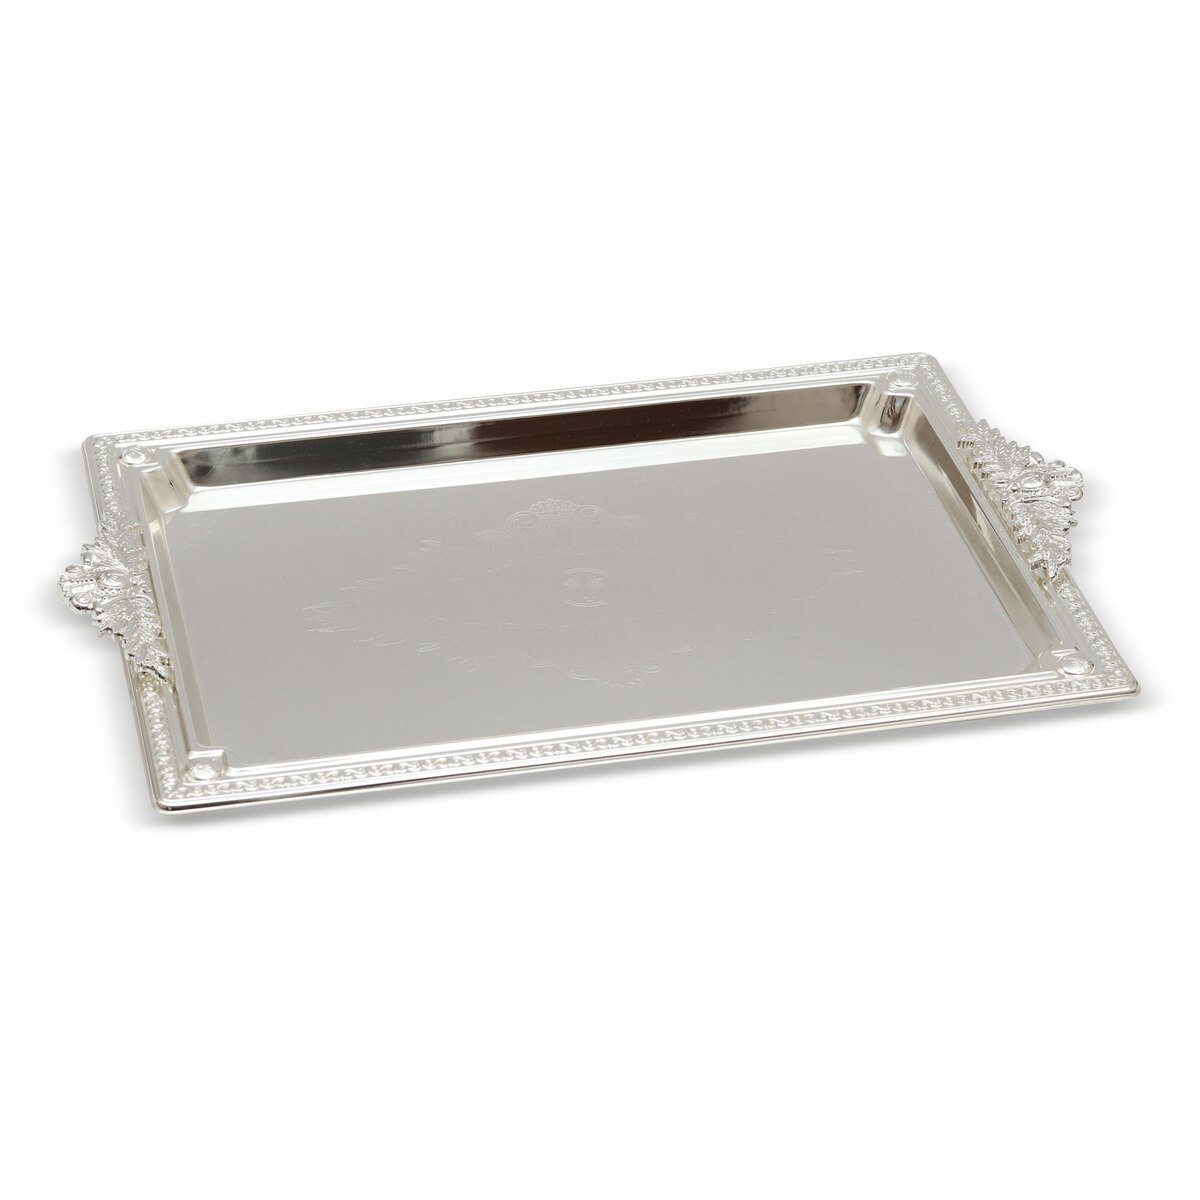 Chefline Stainless Steel Rectangle Tray S548